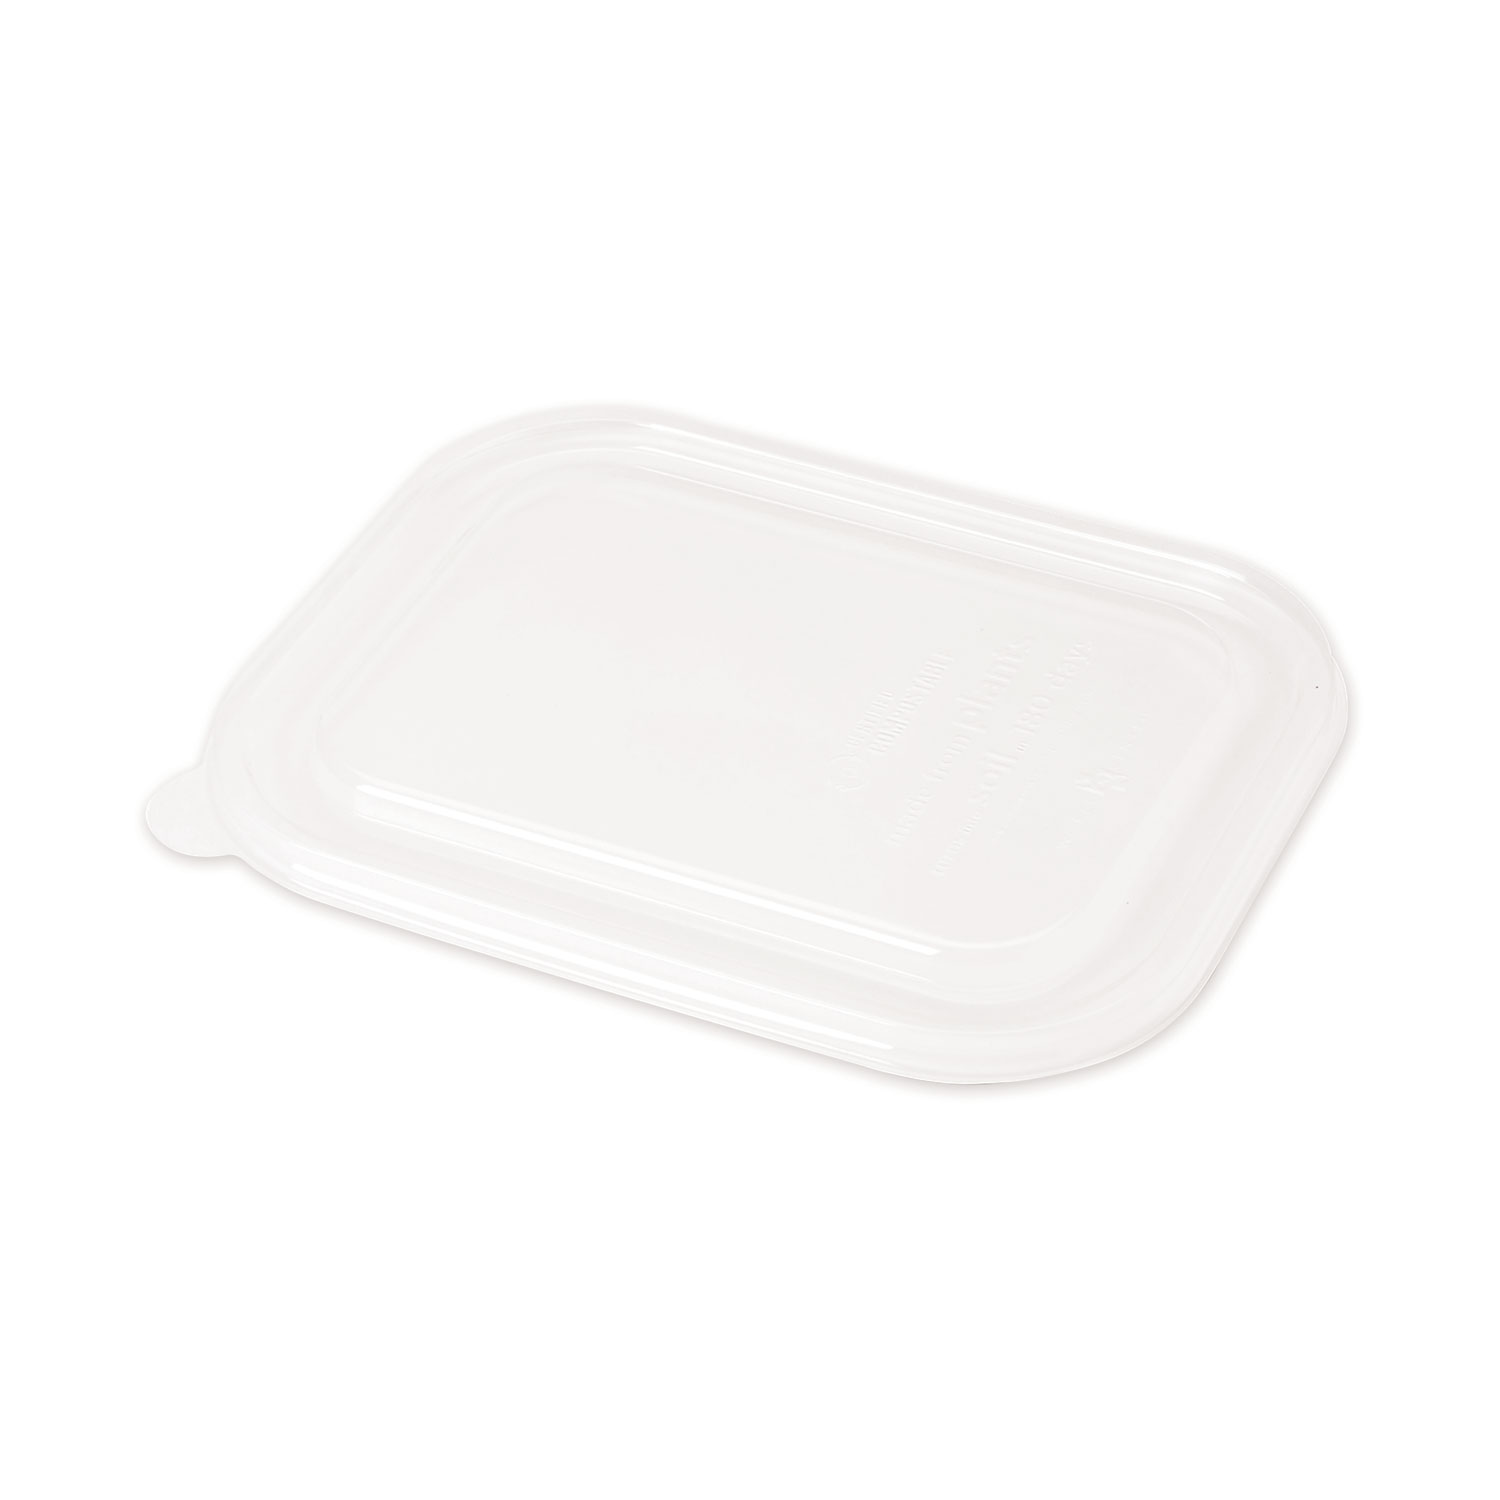  World Centric CTLCS3 PLA Lids for Fiber Containers, 8.8 x 6.9 x 0.8, Clear, 400/Carton (WORCTLCS3) 